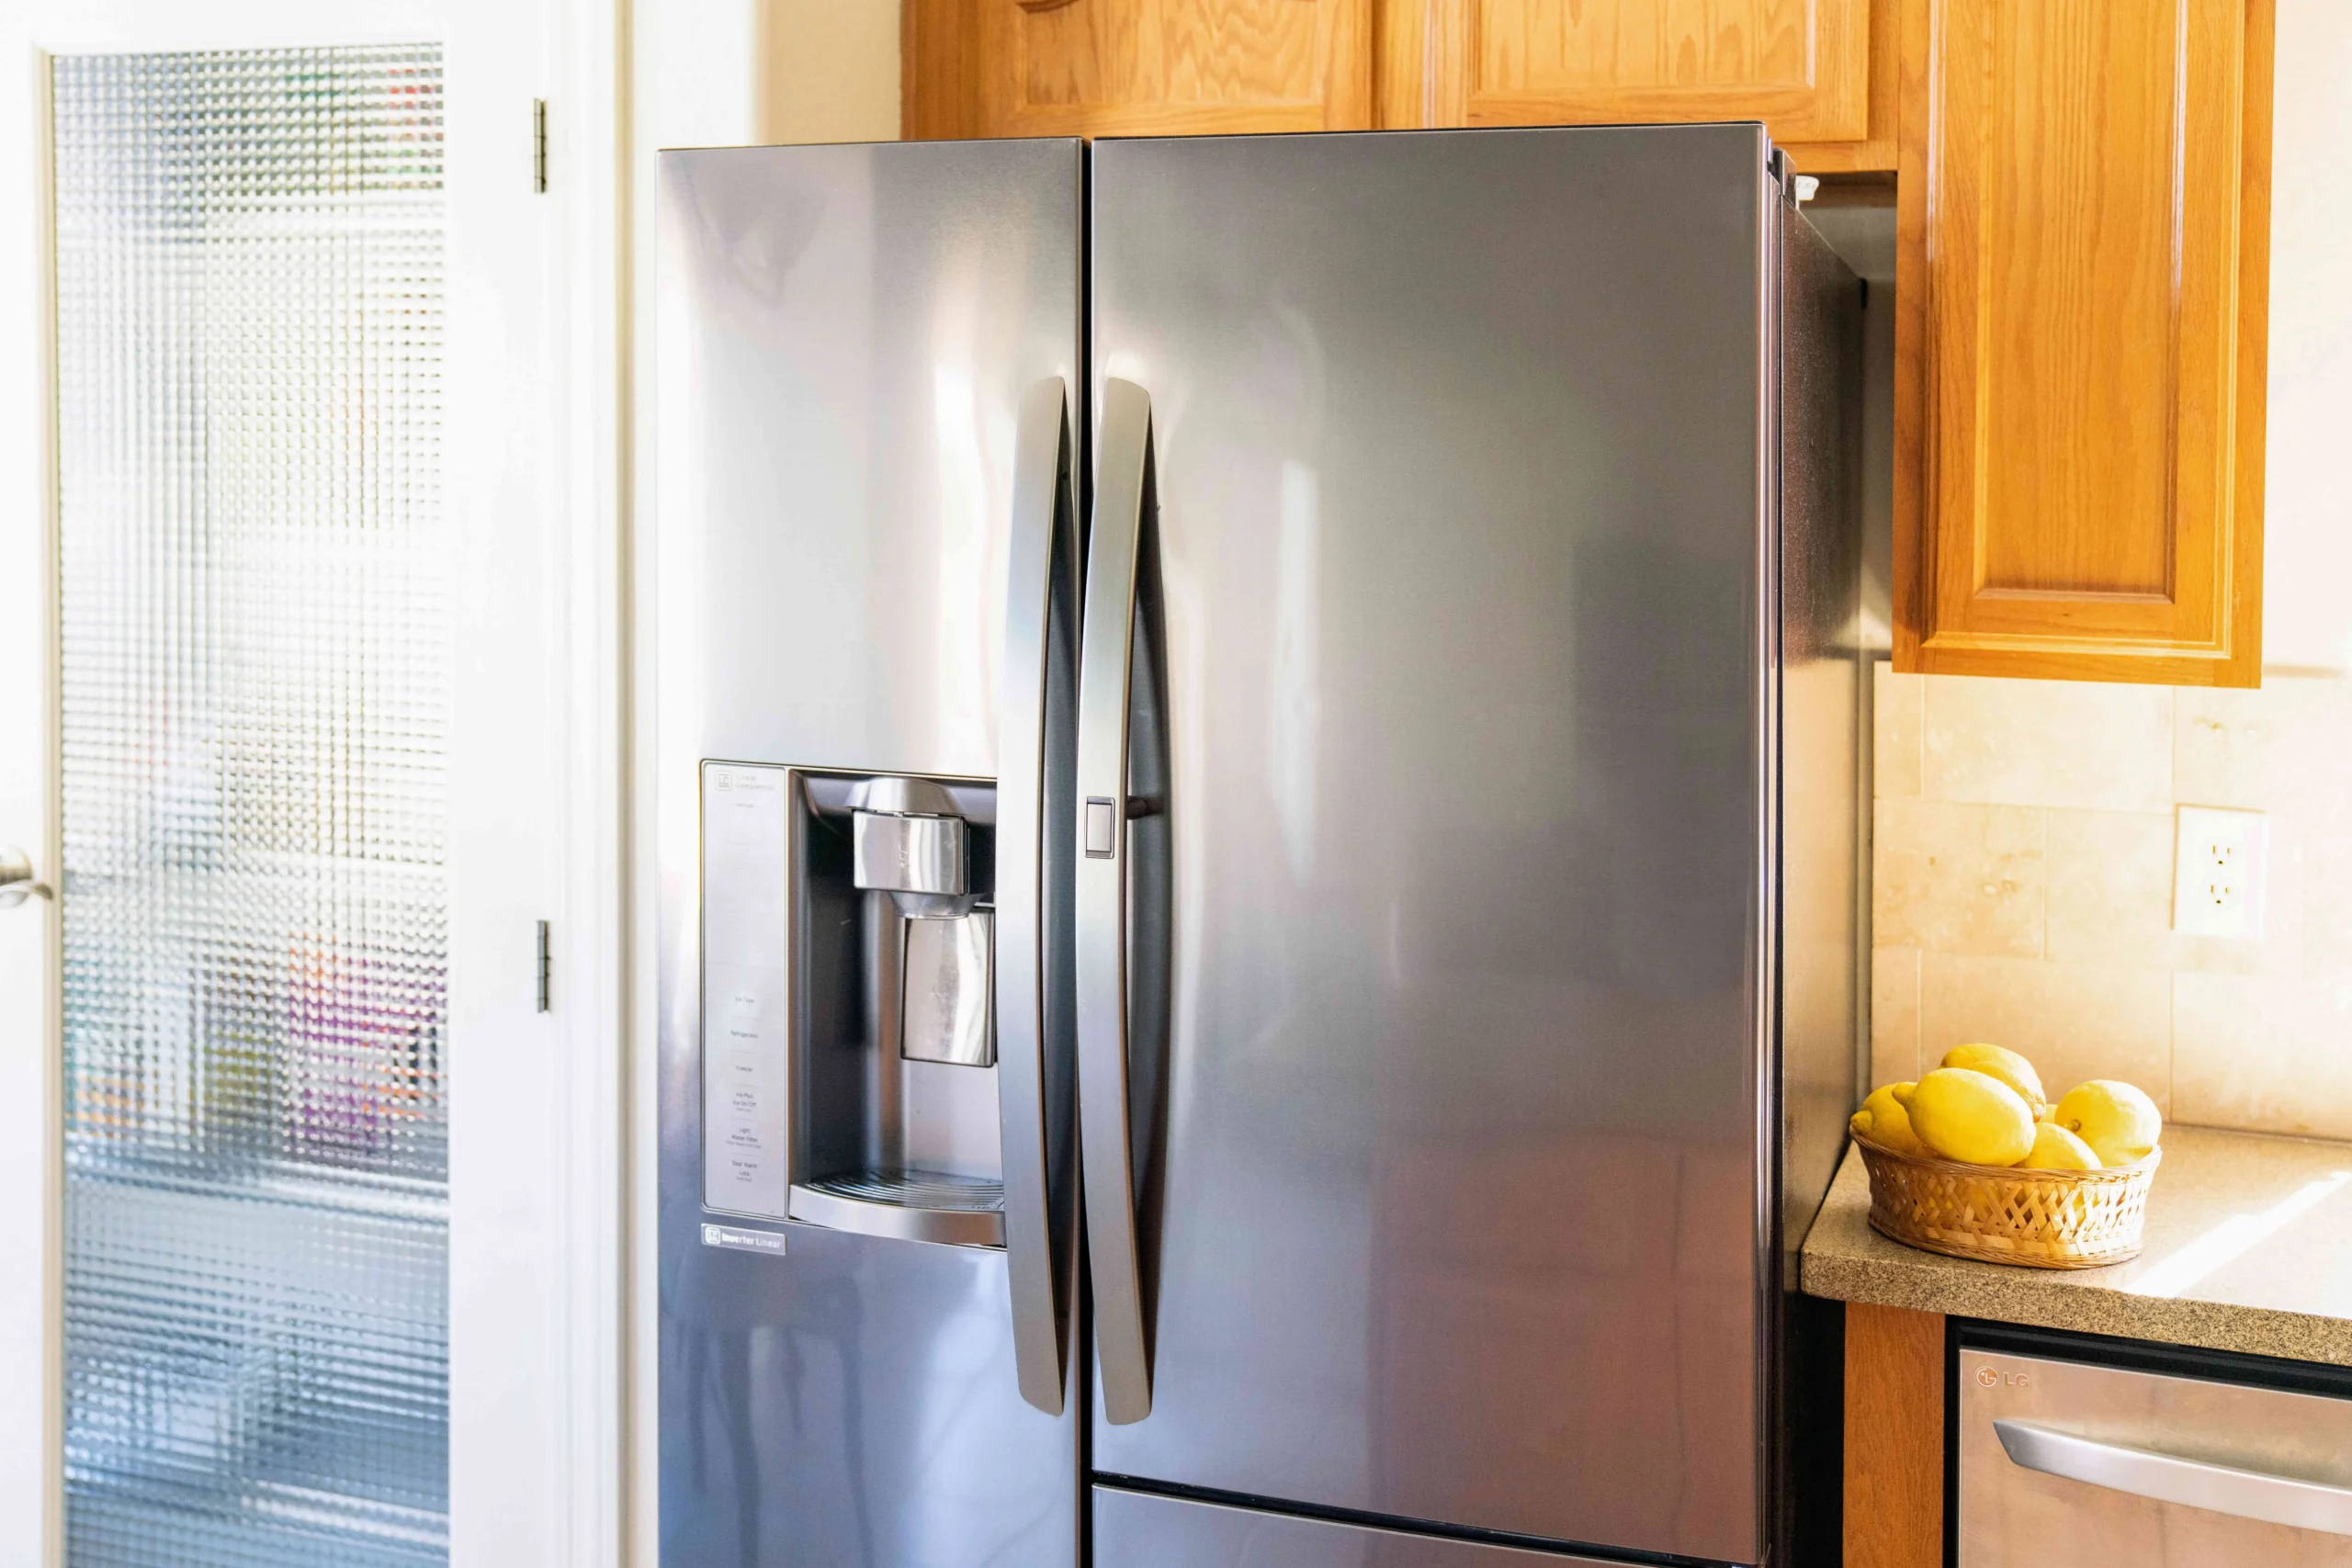 LG Freezer Not Freezing? Here’s What to Do